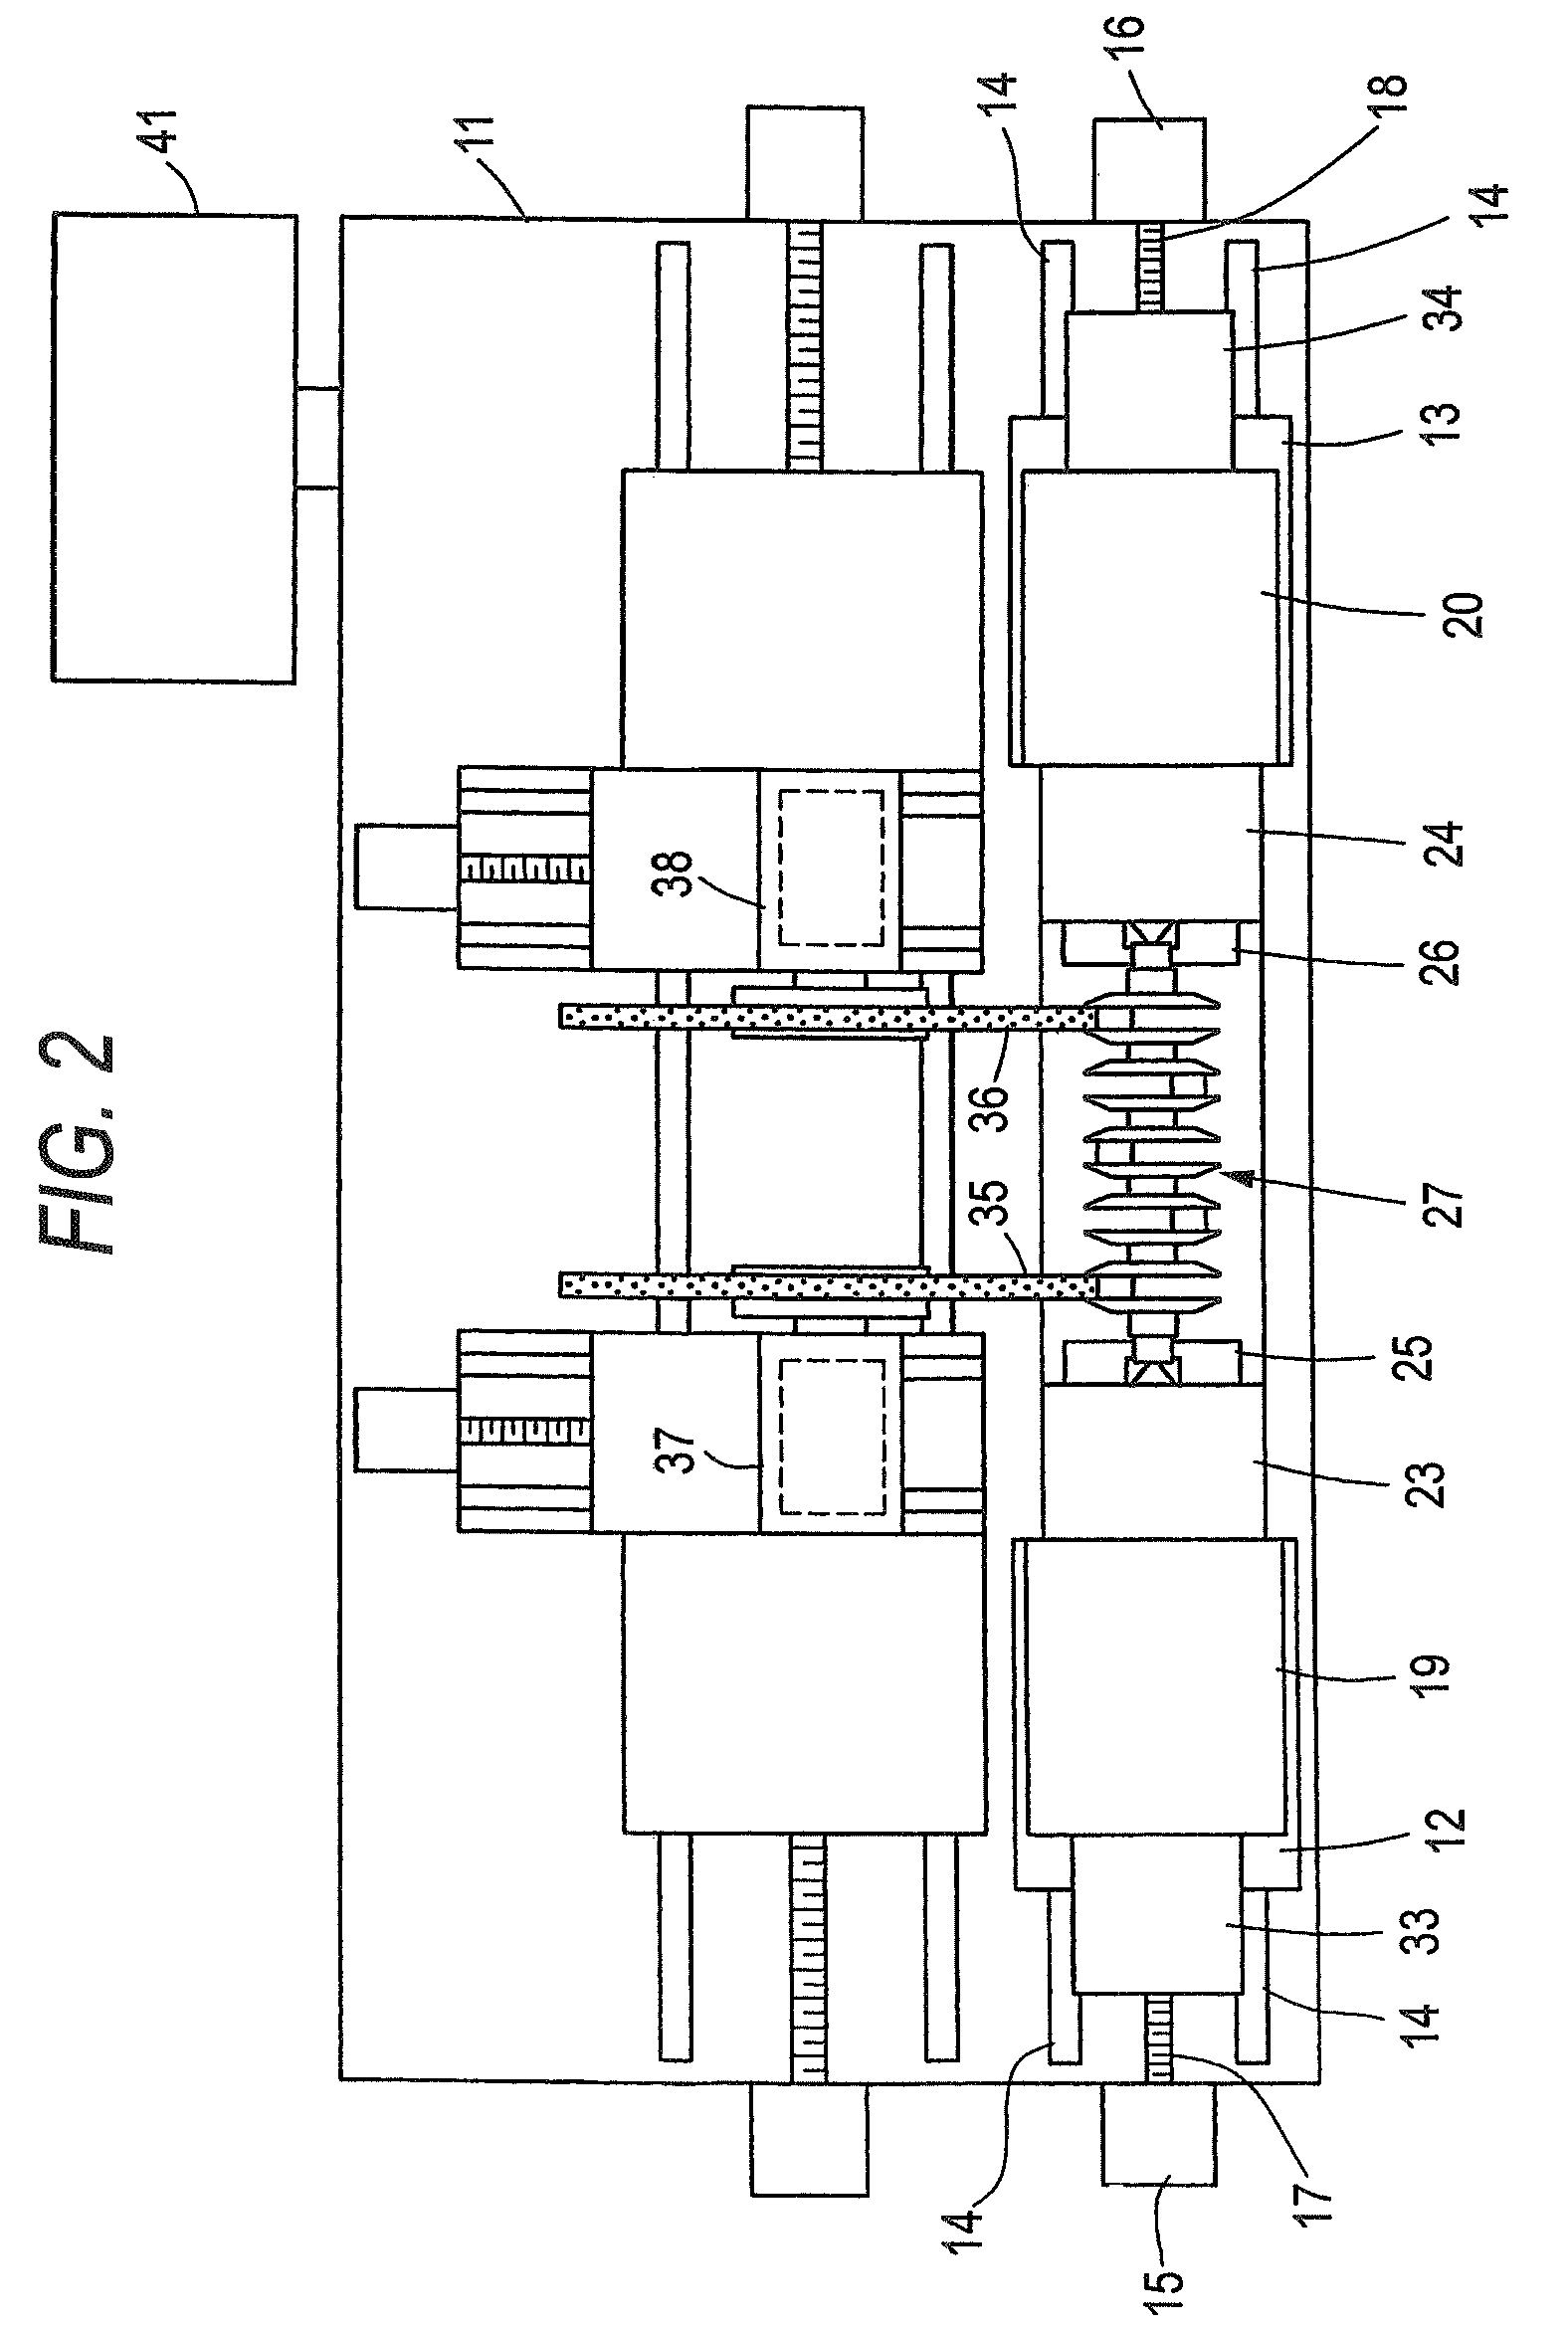 Method for detecting malfunction in clamping and machine tool